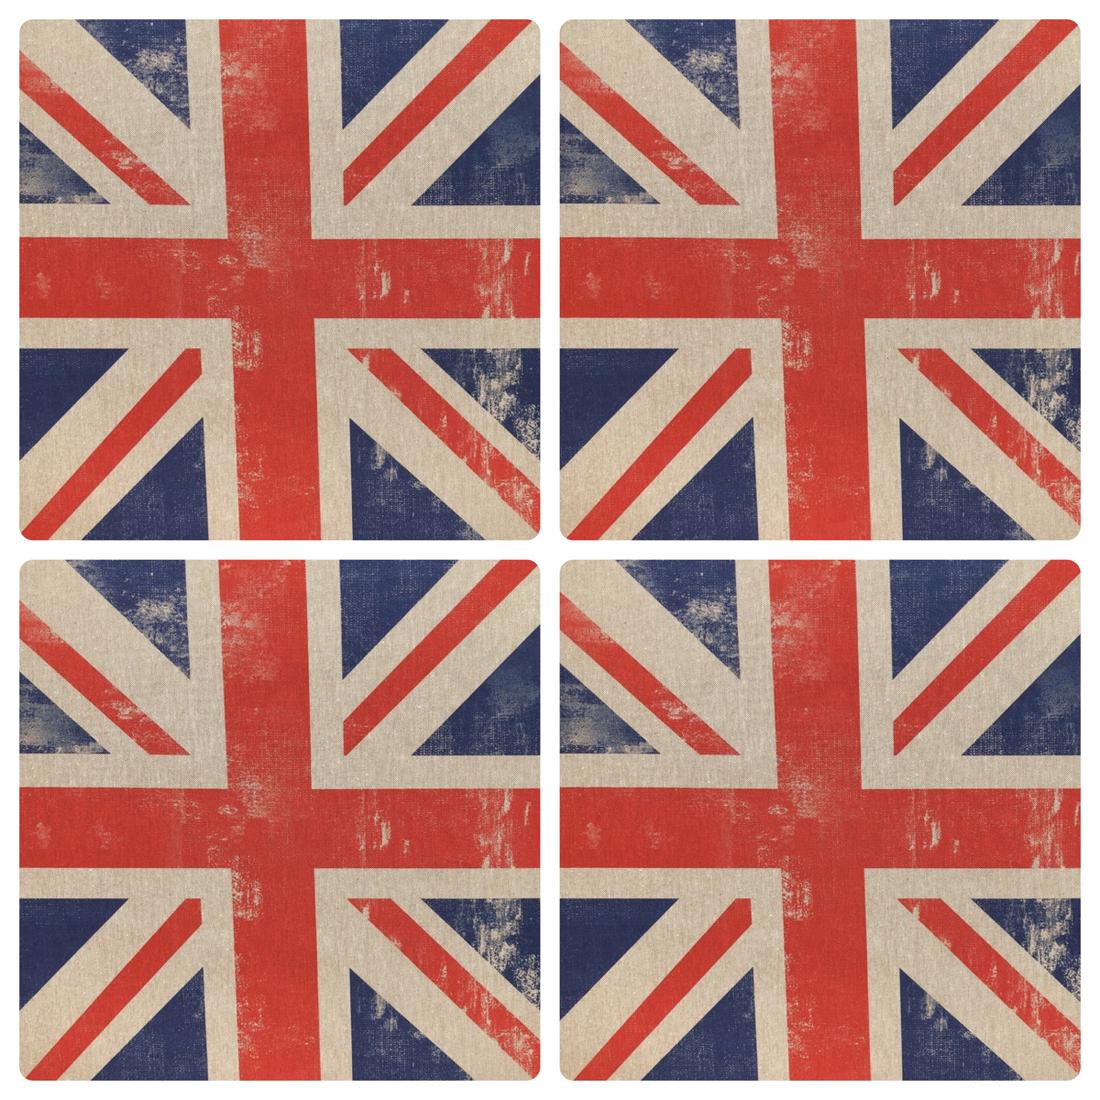 Special Offer! 4 Union Jack Rustic Cushion Panels